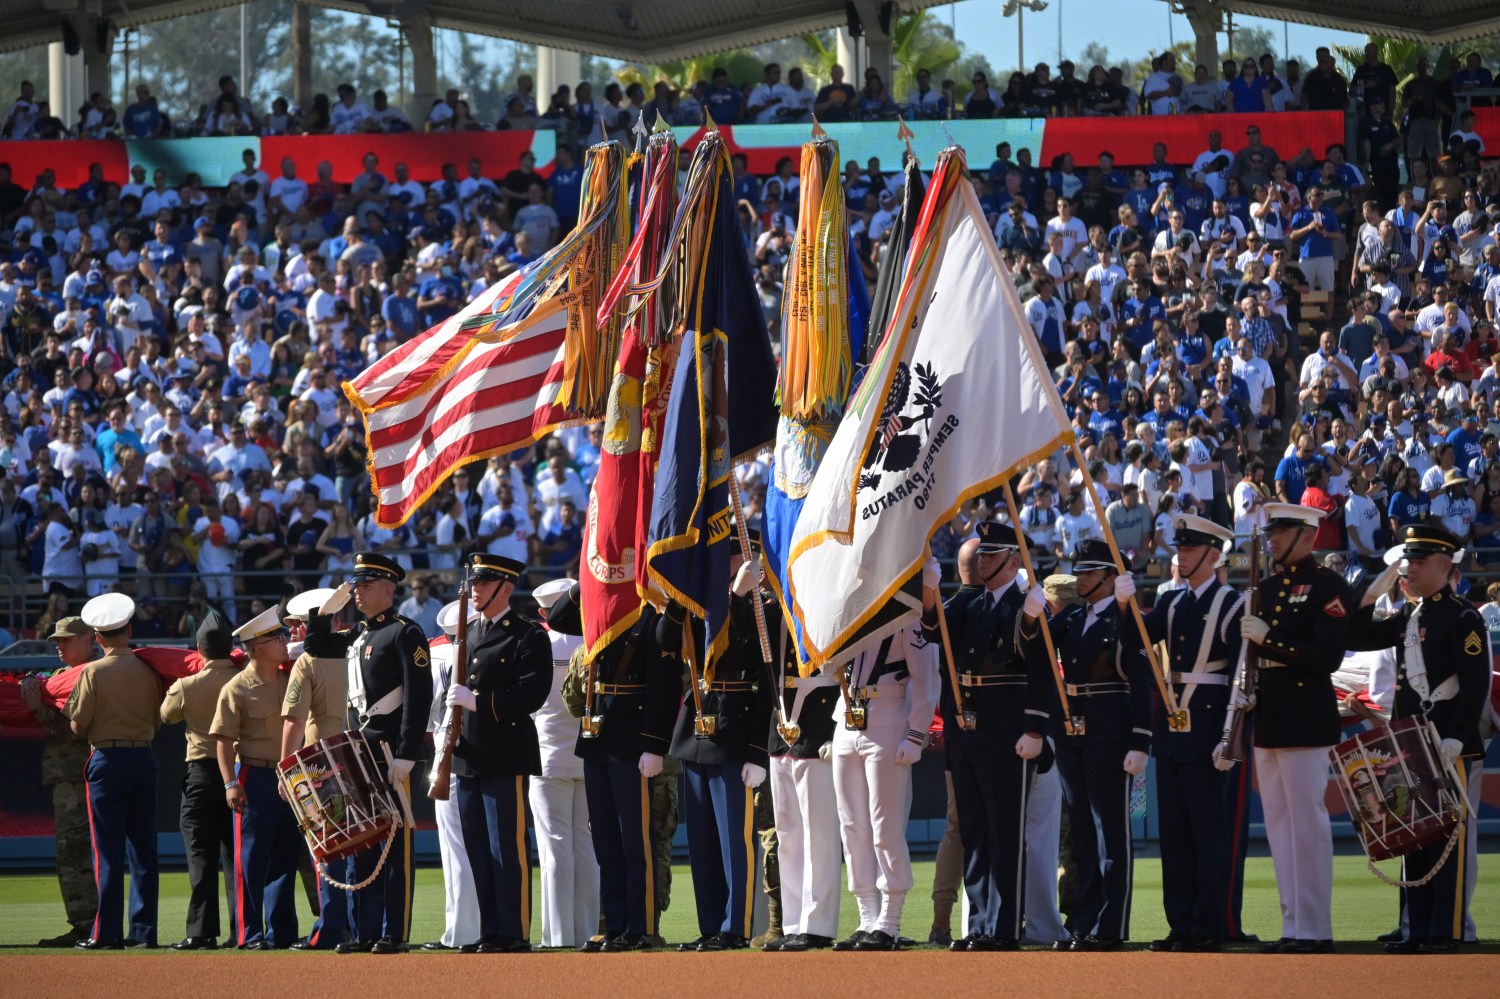 Jul 19, 2022; Los Angeles, California, USA; Members of the military present the flag during the national anthem before the game between the American League and the National League at Dodger Stadium. Mandatory Credit: Jayne Kamin-Oncea-USA TODAY Sports